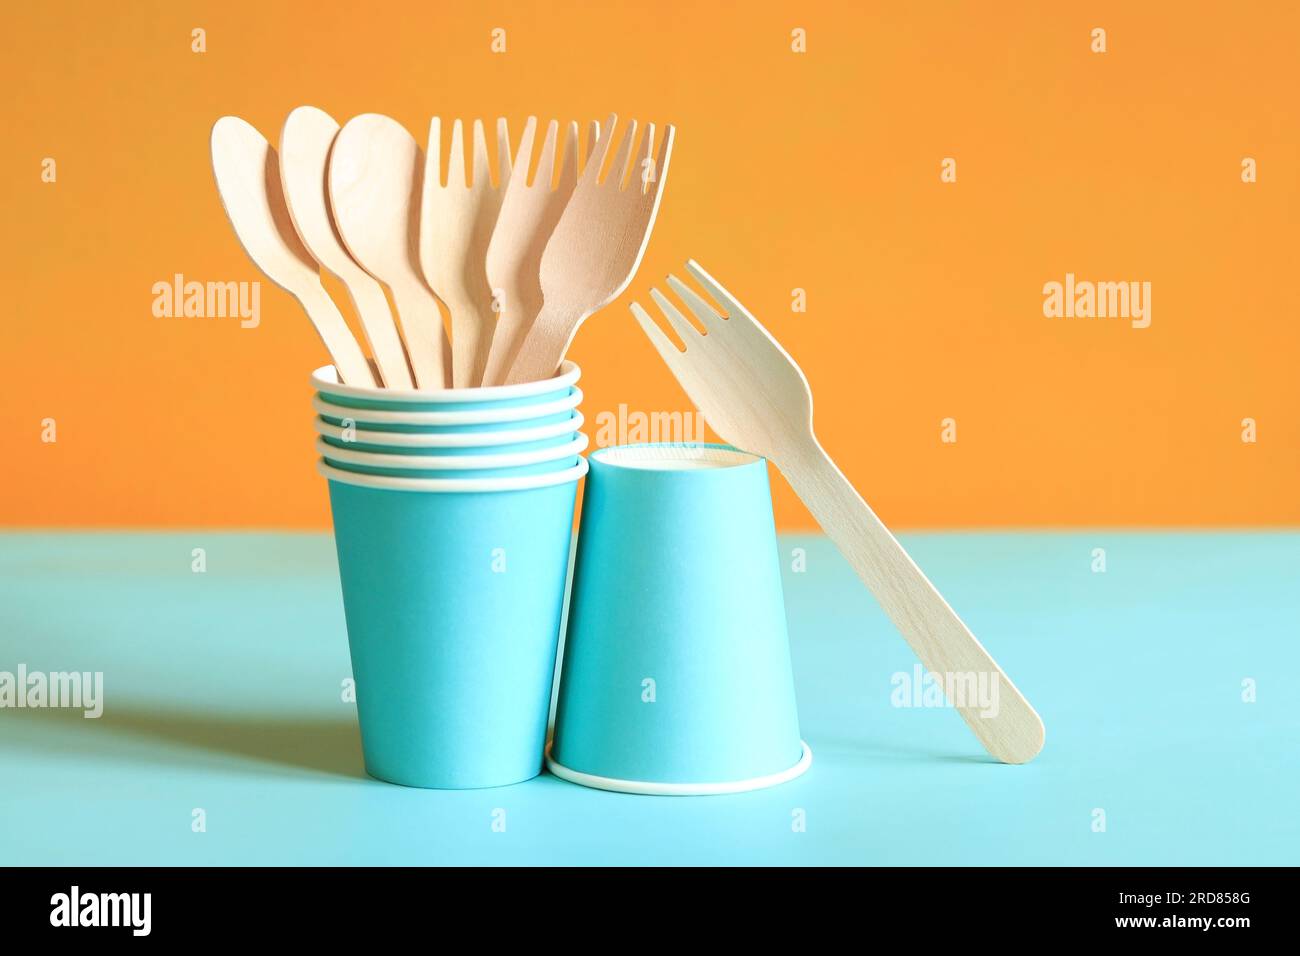 Wooden disposable forks and spoons in a blue paper cup, side view. Eco friendly disposable kitchen utensils on orange background, copy space. Ecologic Stock Photo